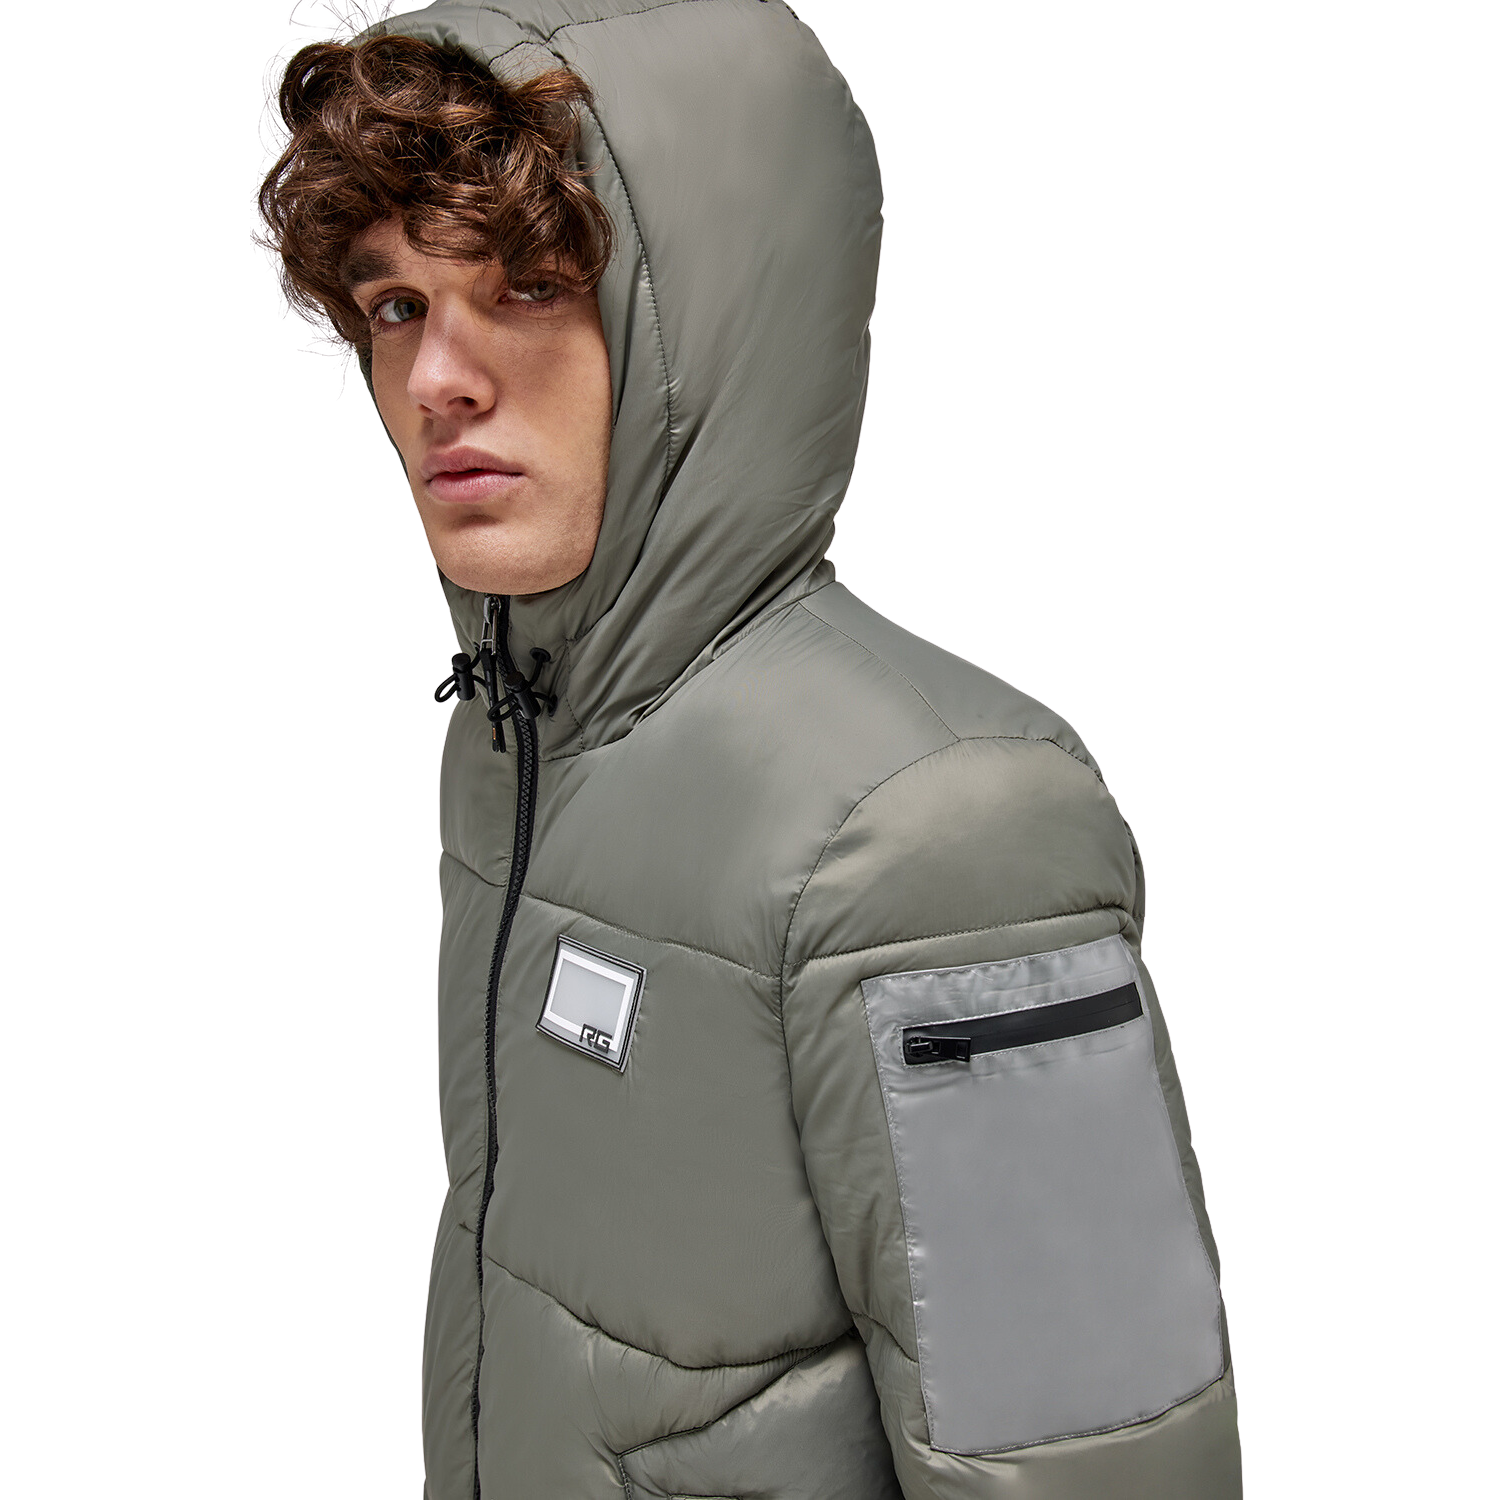 Mens RG Quilted Hooded Puffer Coat - Khaki